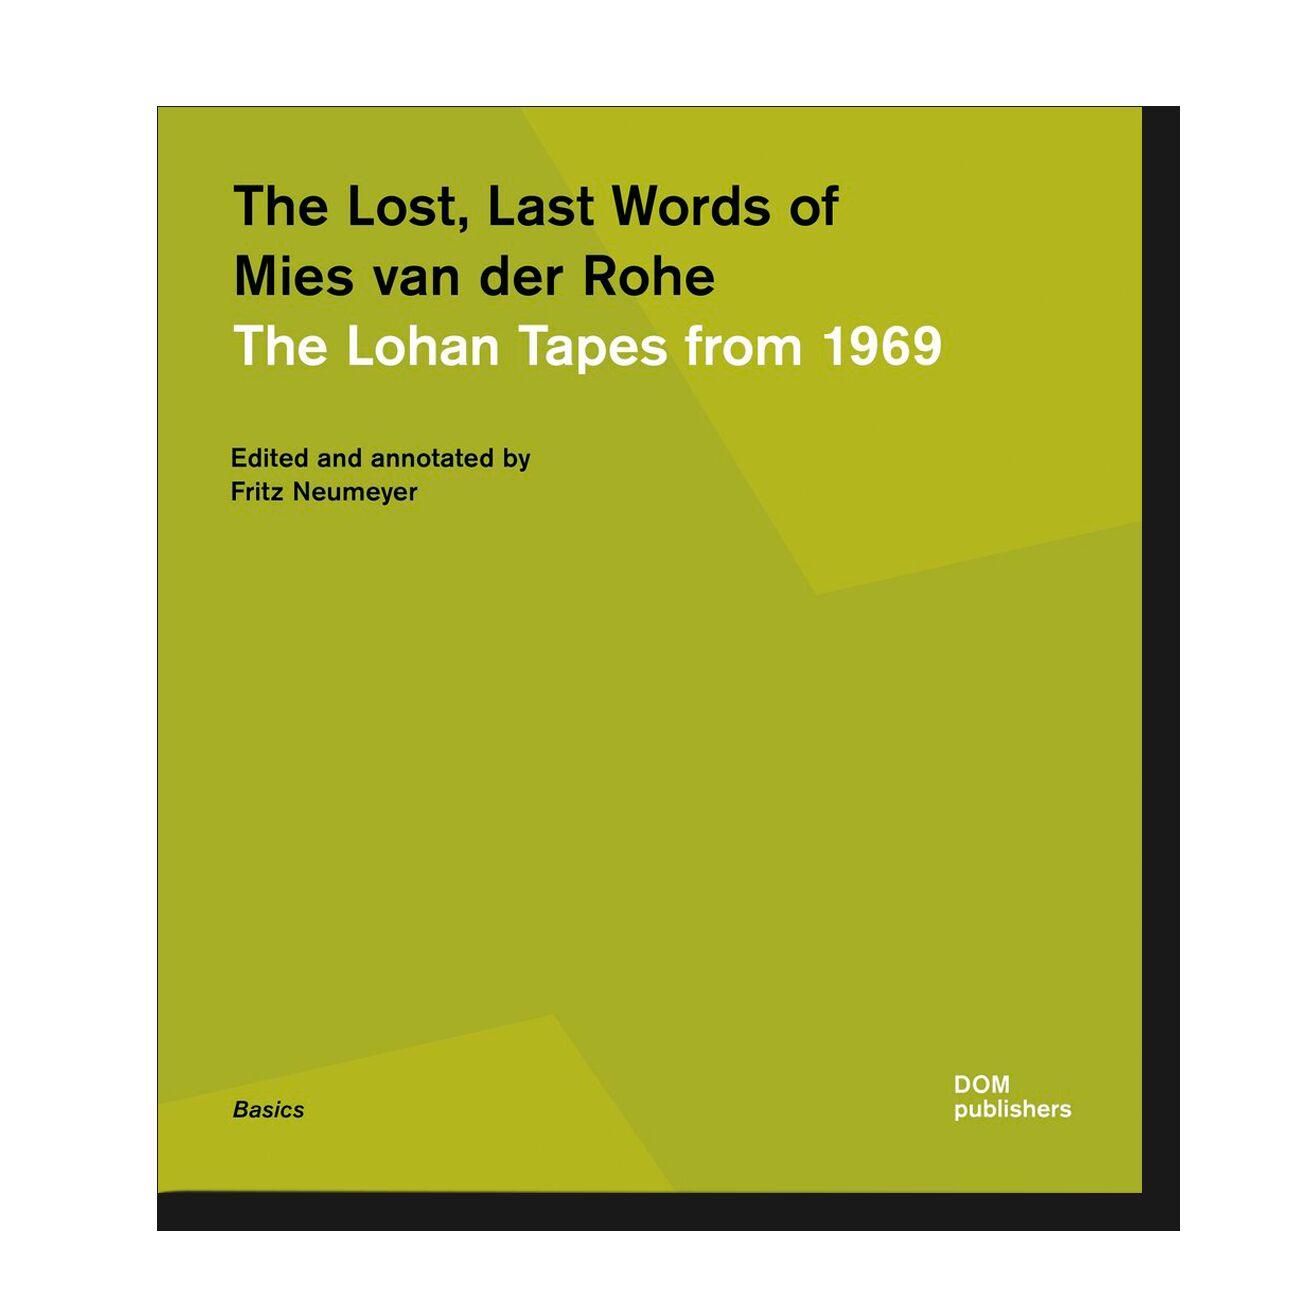 The Lost, Last Words of Mies van der Rohe. The Lohan Tapes from 1969